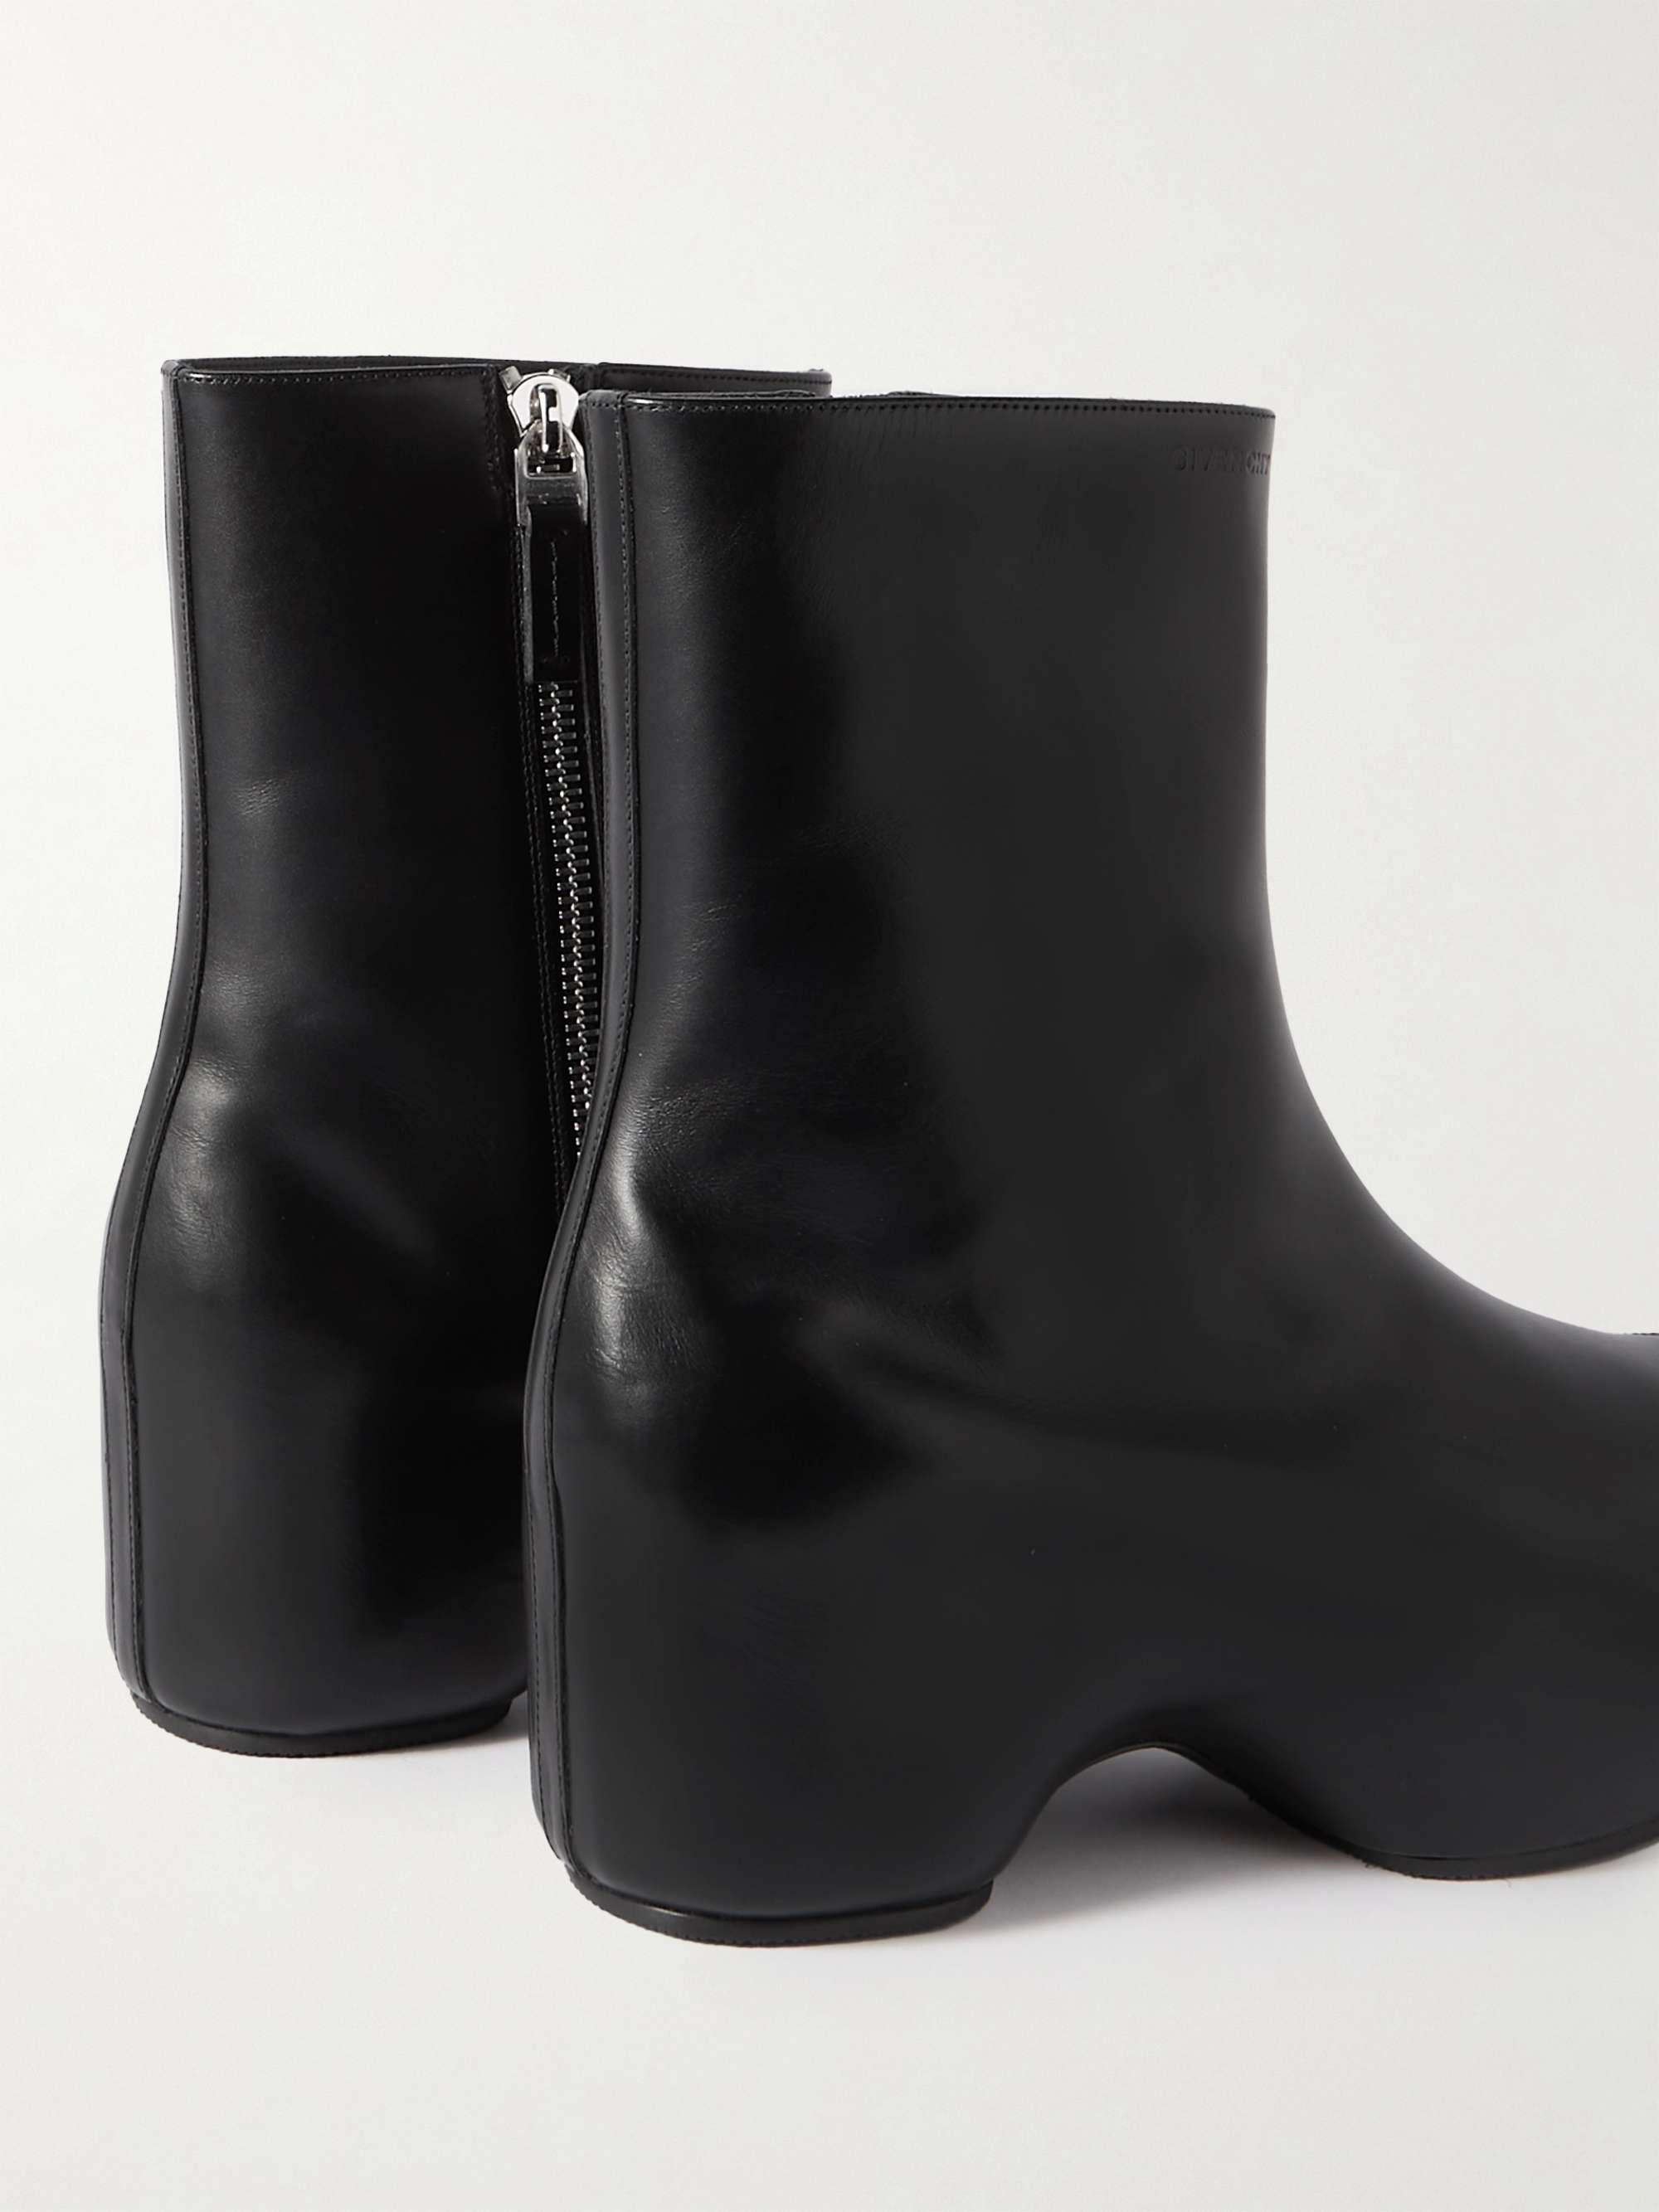 GIVENCHY G Leather Chelsea Boots